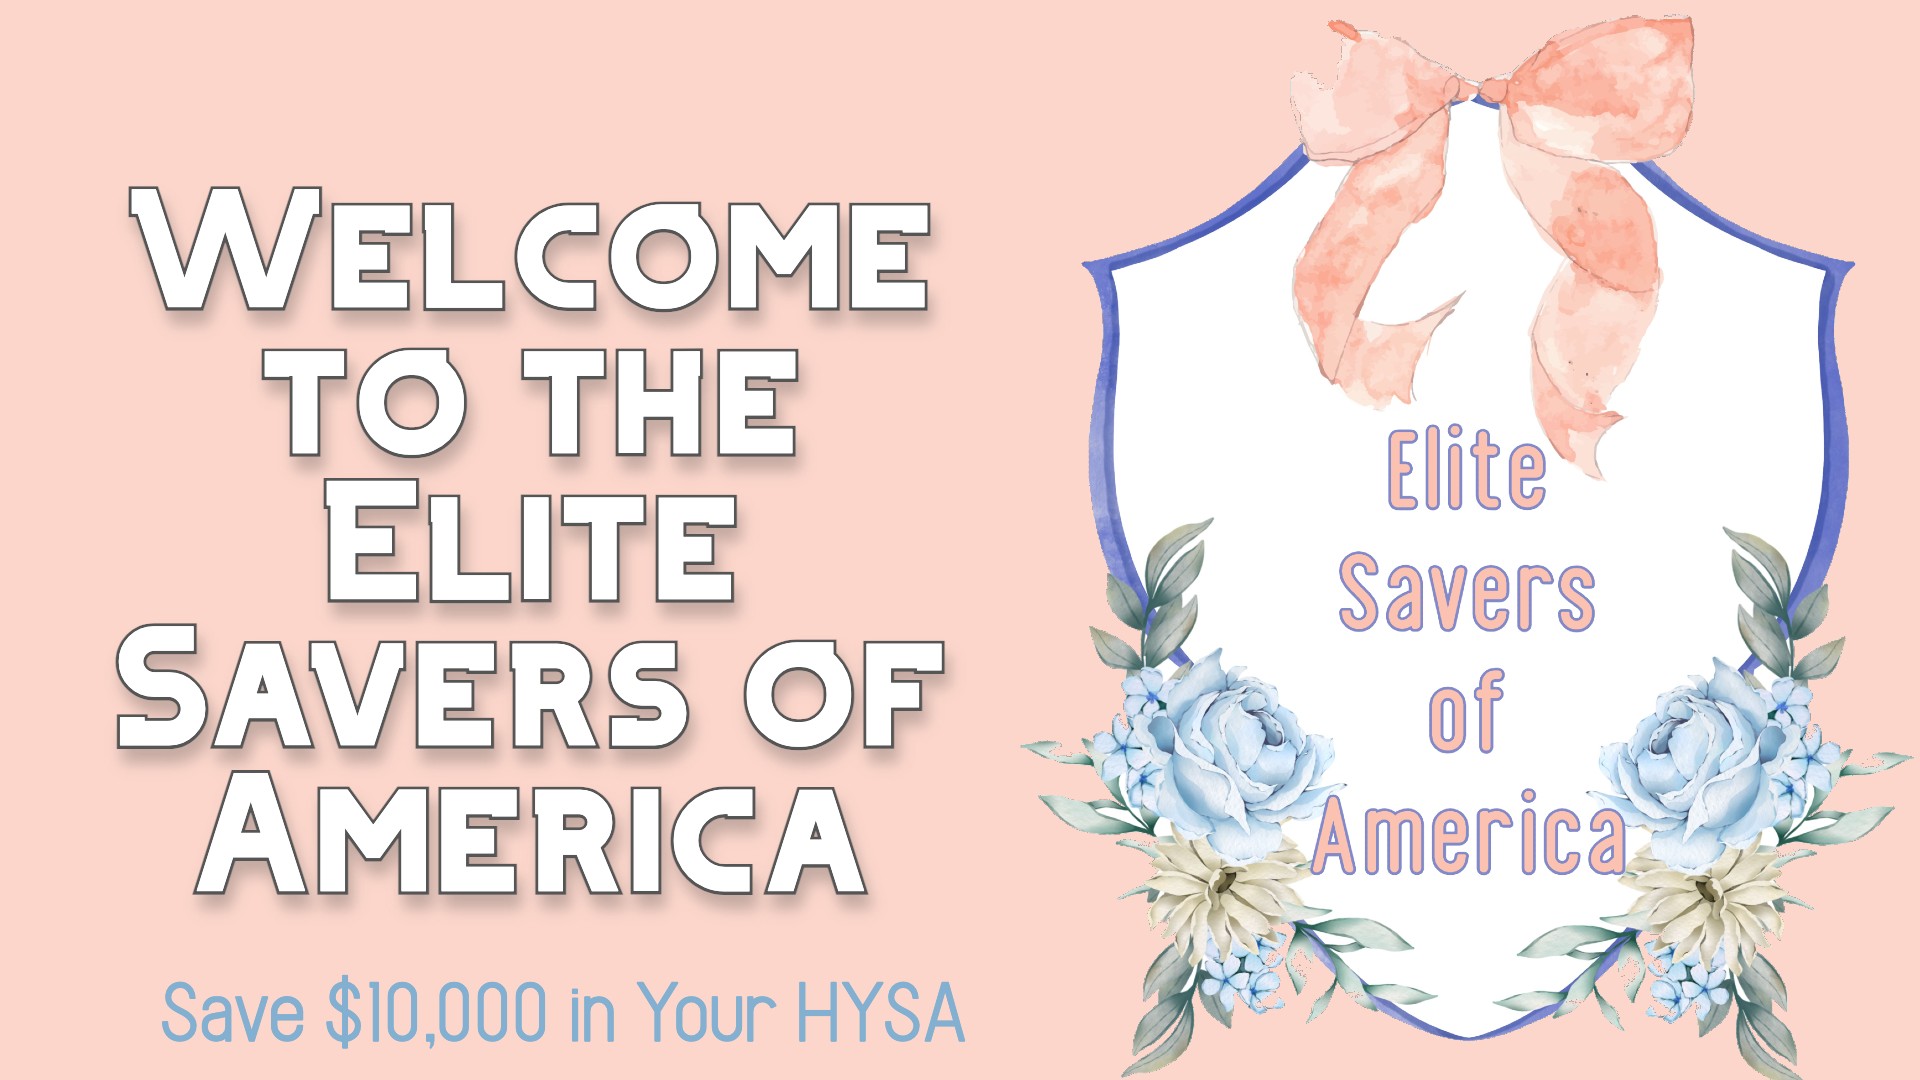 Welcome to the Elite Savers of America: Save $10,000 in Your HYSA